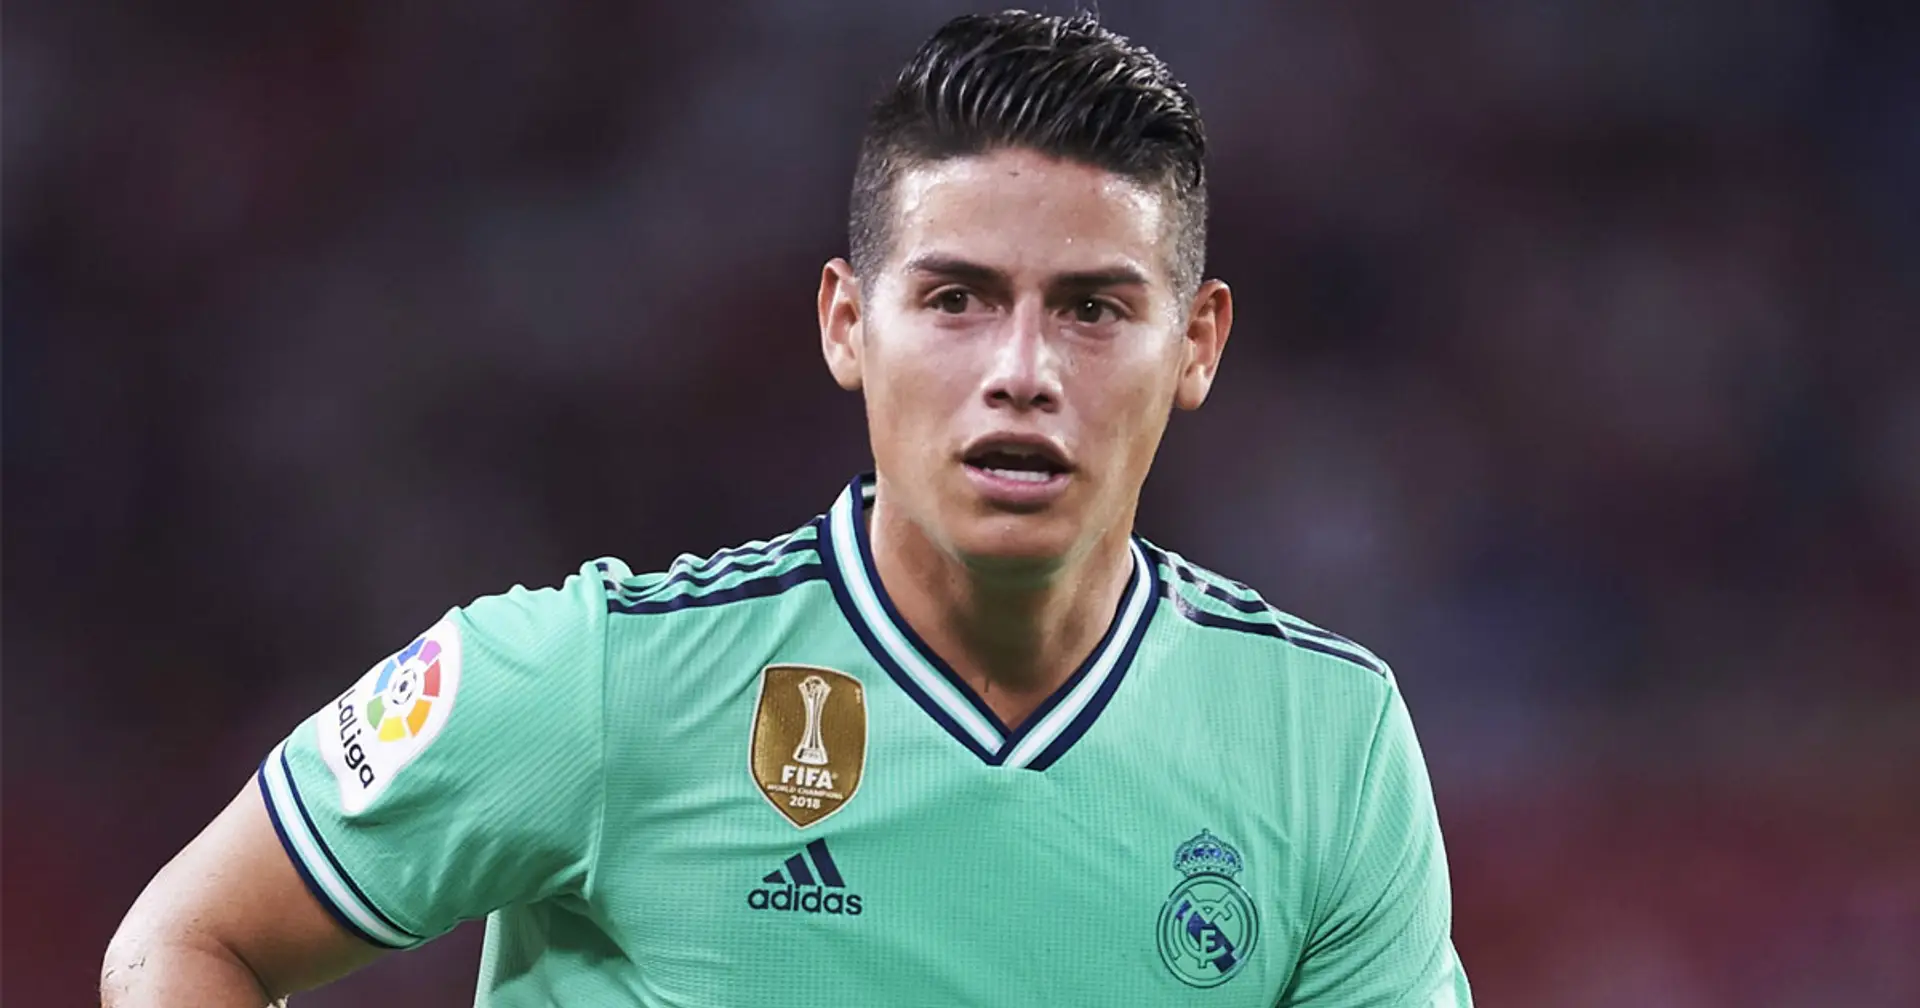 Premier League clubs ‘keeping tabs’ on James’ situation at Real Madrid